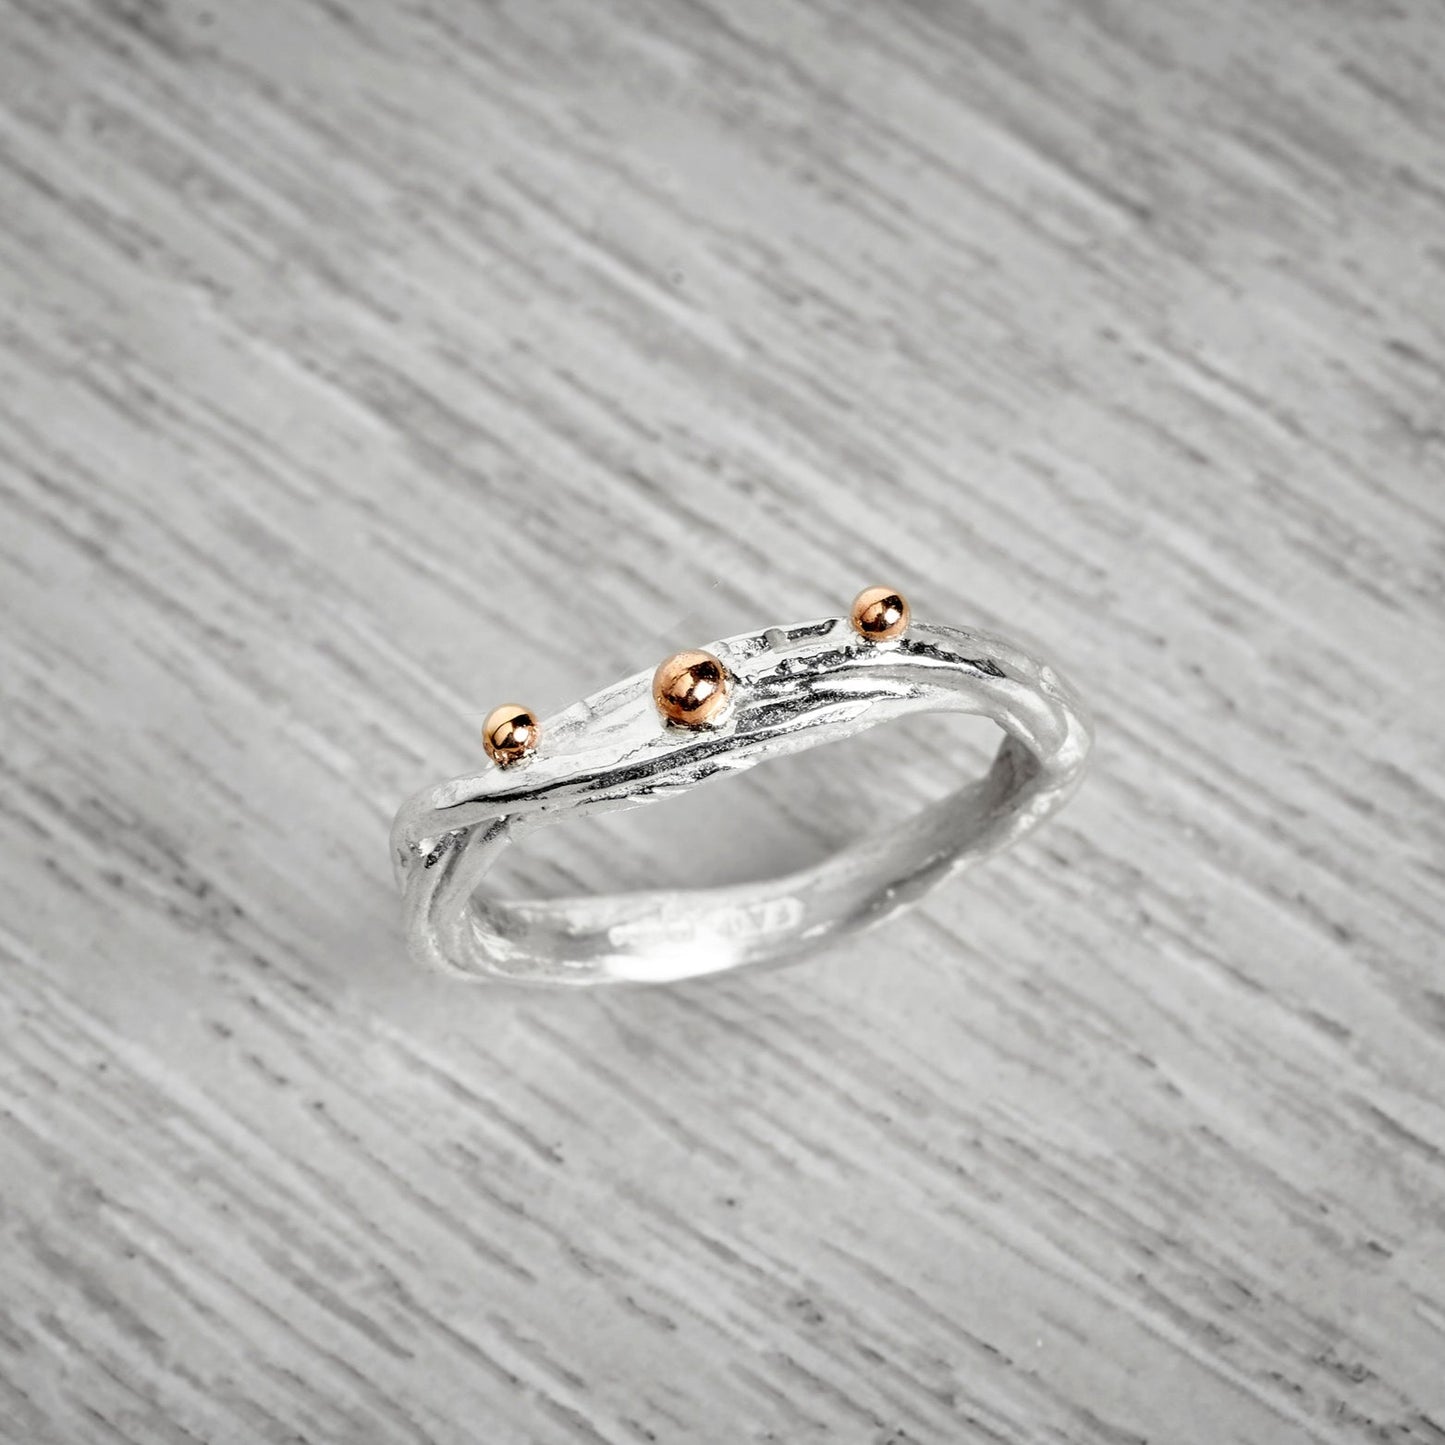 Narrow Wire Ring with 3 Gold Nuggets By Fi Mehra